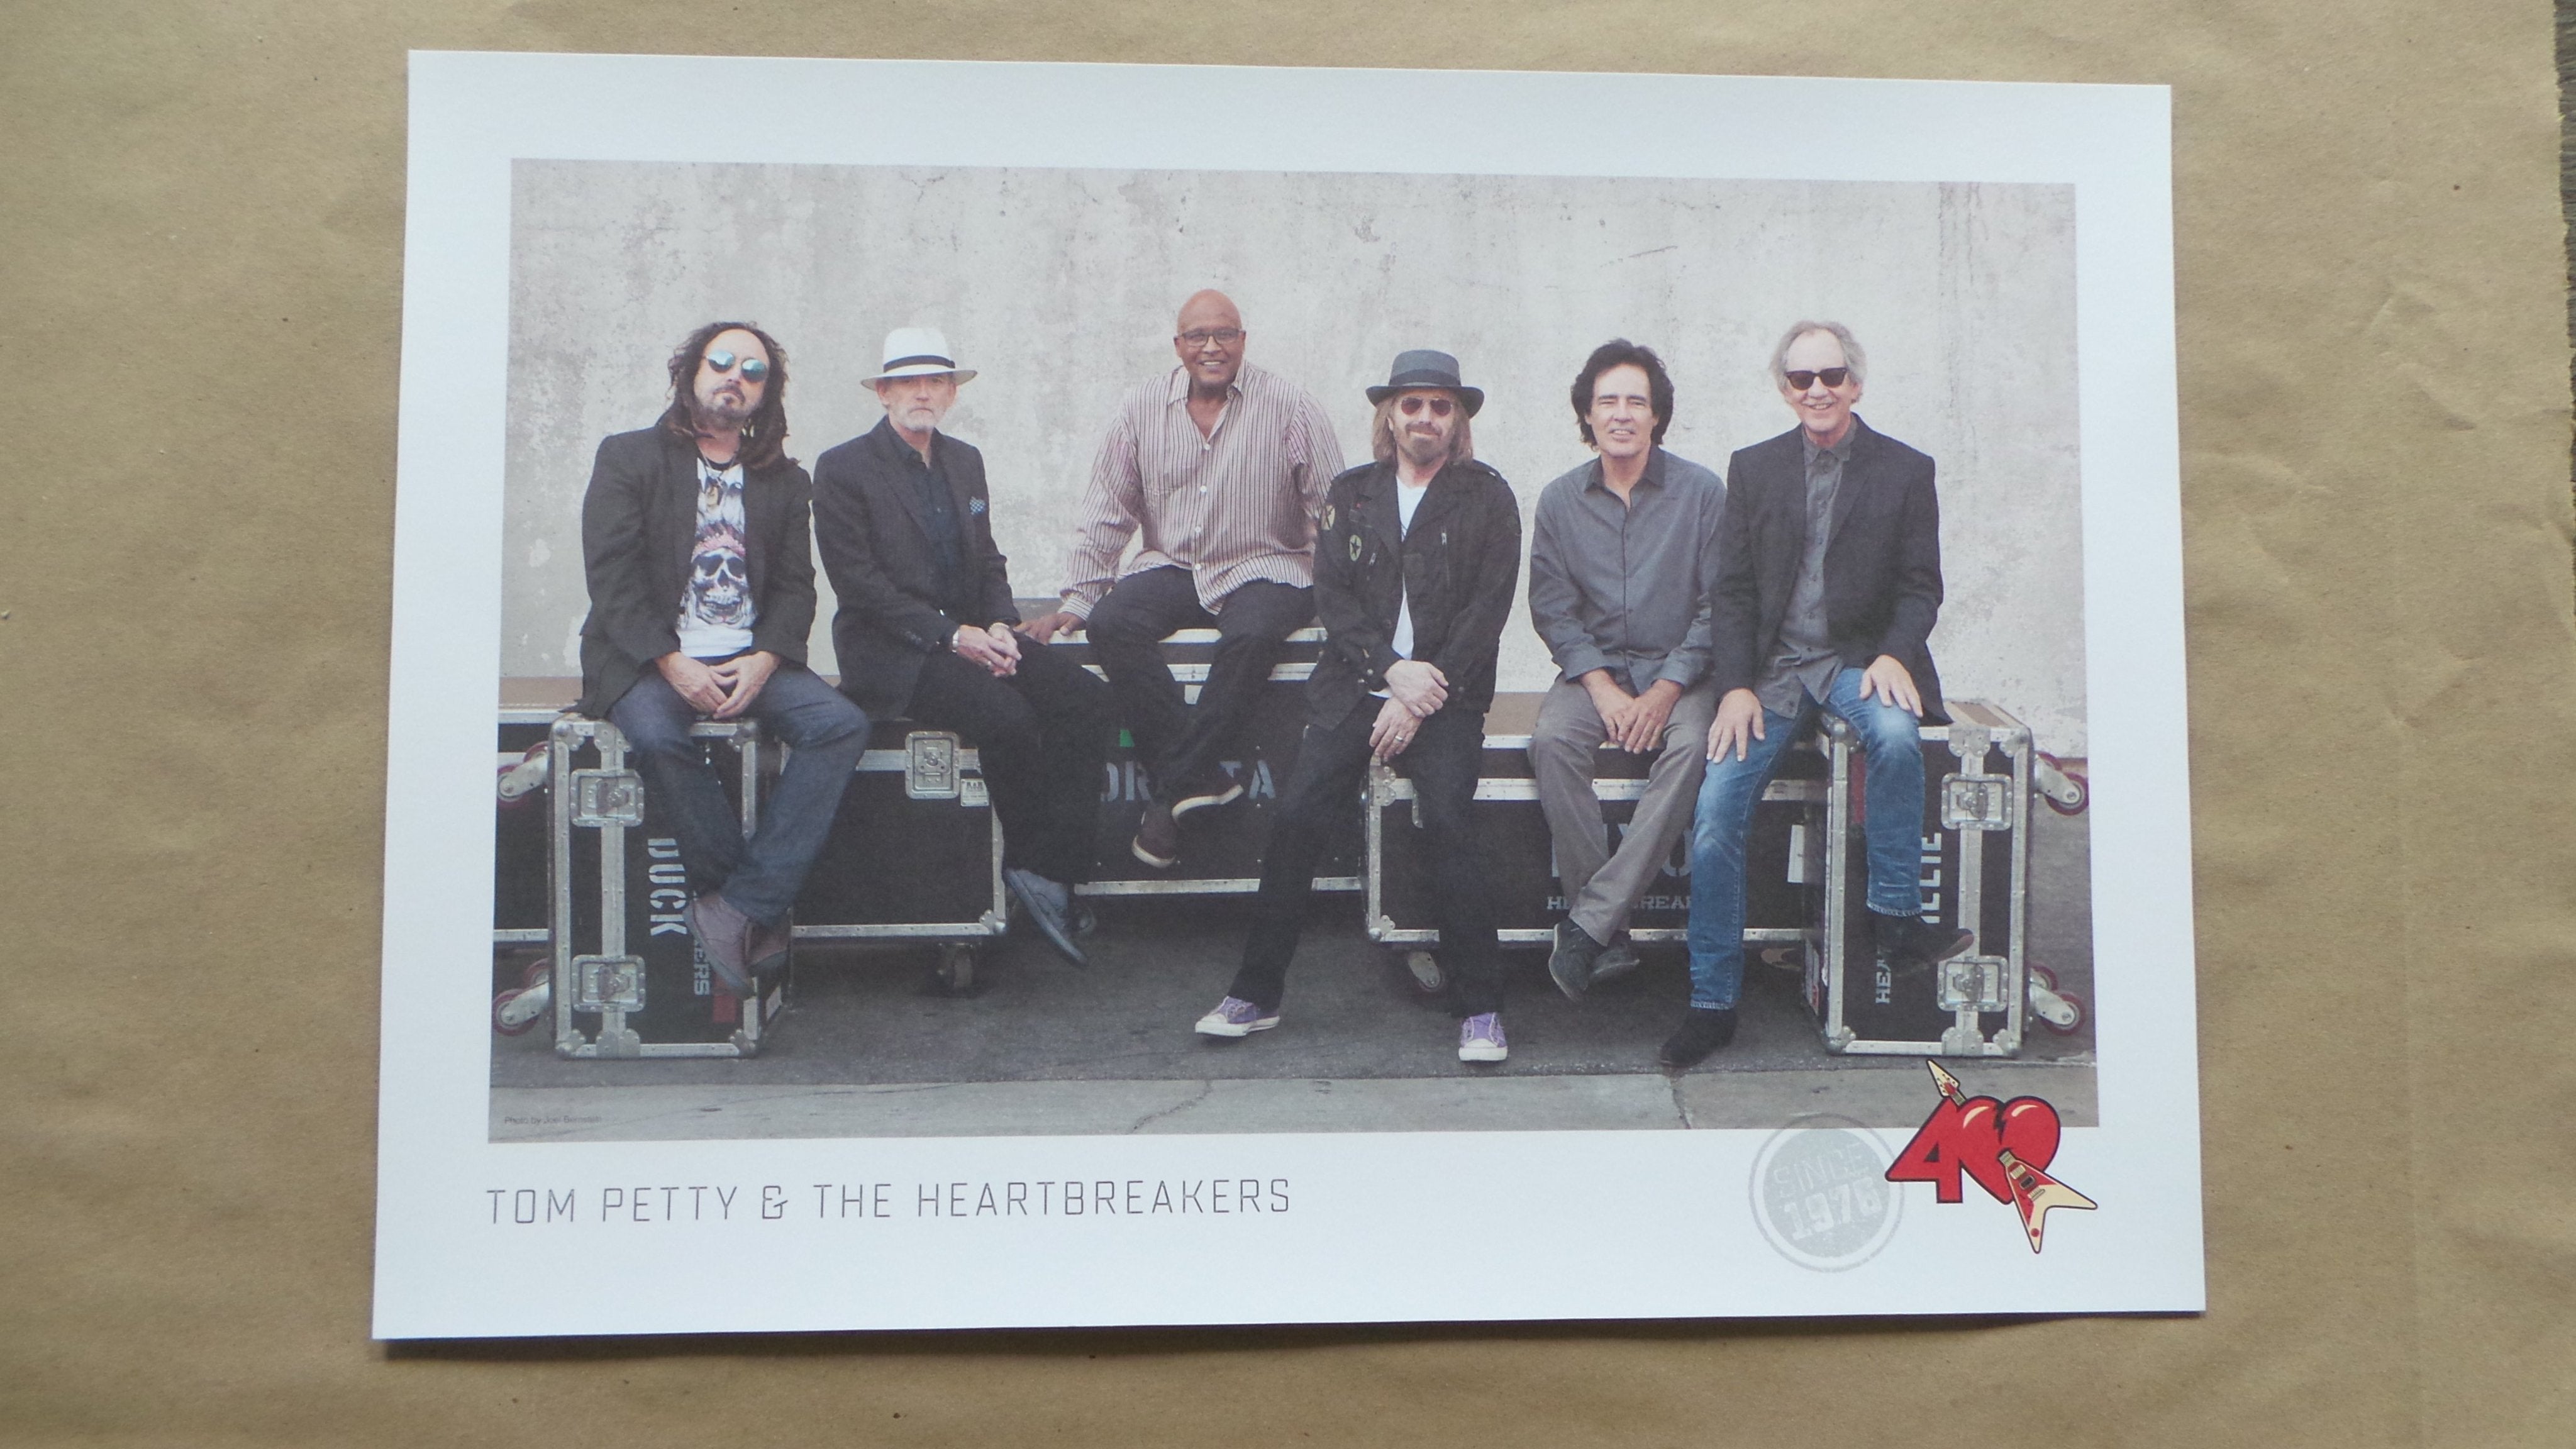 Title: TOM PETTY - 2016 FAN CLUB POSTER HEARTBREAKERS 40TH ANNIVERSARY Poster artist: Joel Bernstein, Photographer Size: 22" x 16"  Notes: Limited edition fan club poster original printing.  Check out our other listings for more hard-to-find and out-of-print posters.